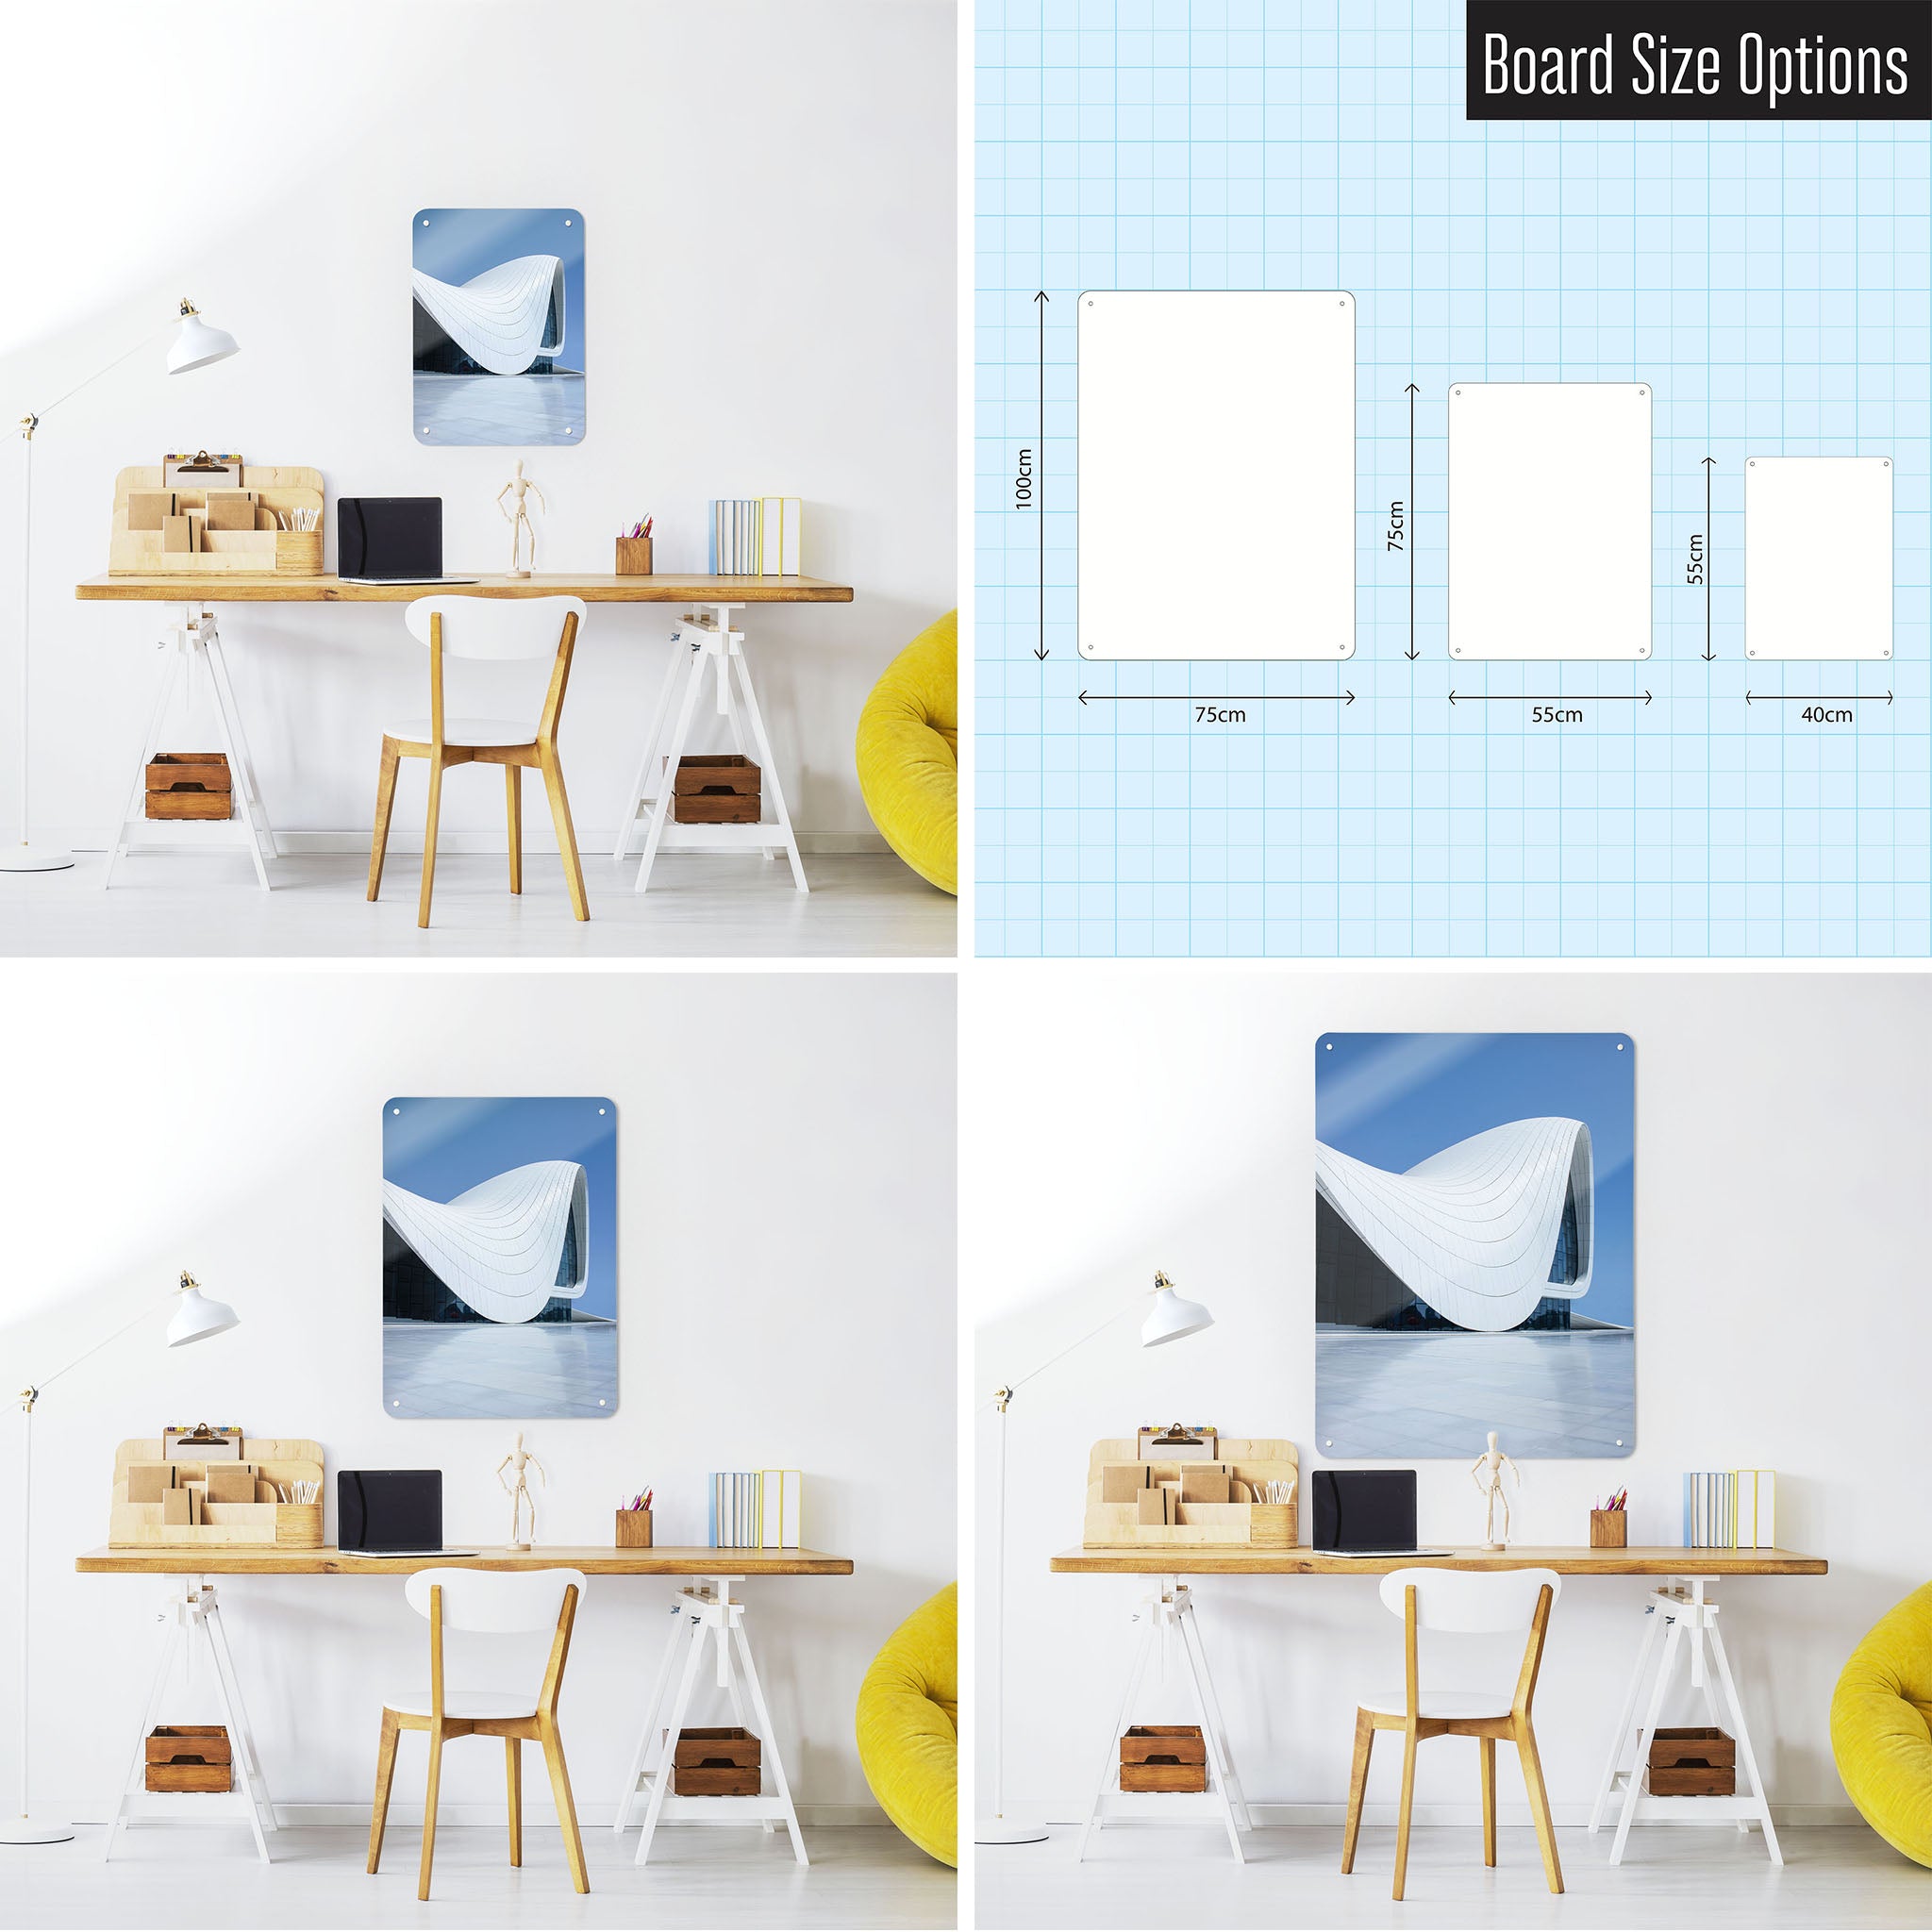 Three photographs of a workspace interior and a diagram to show size comparisons of a Heydar Aliyev Centre magnetic notice board